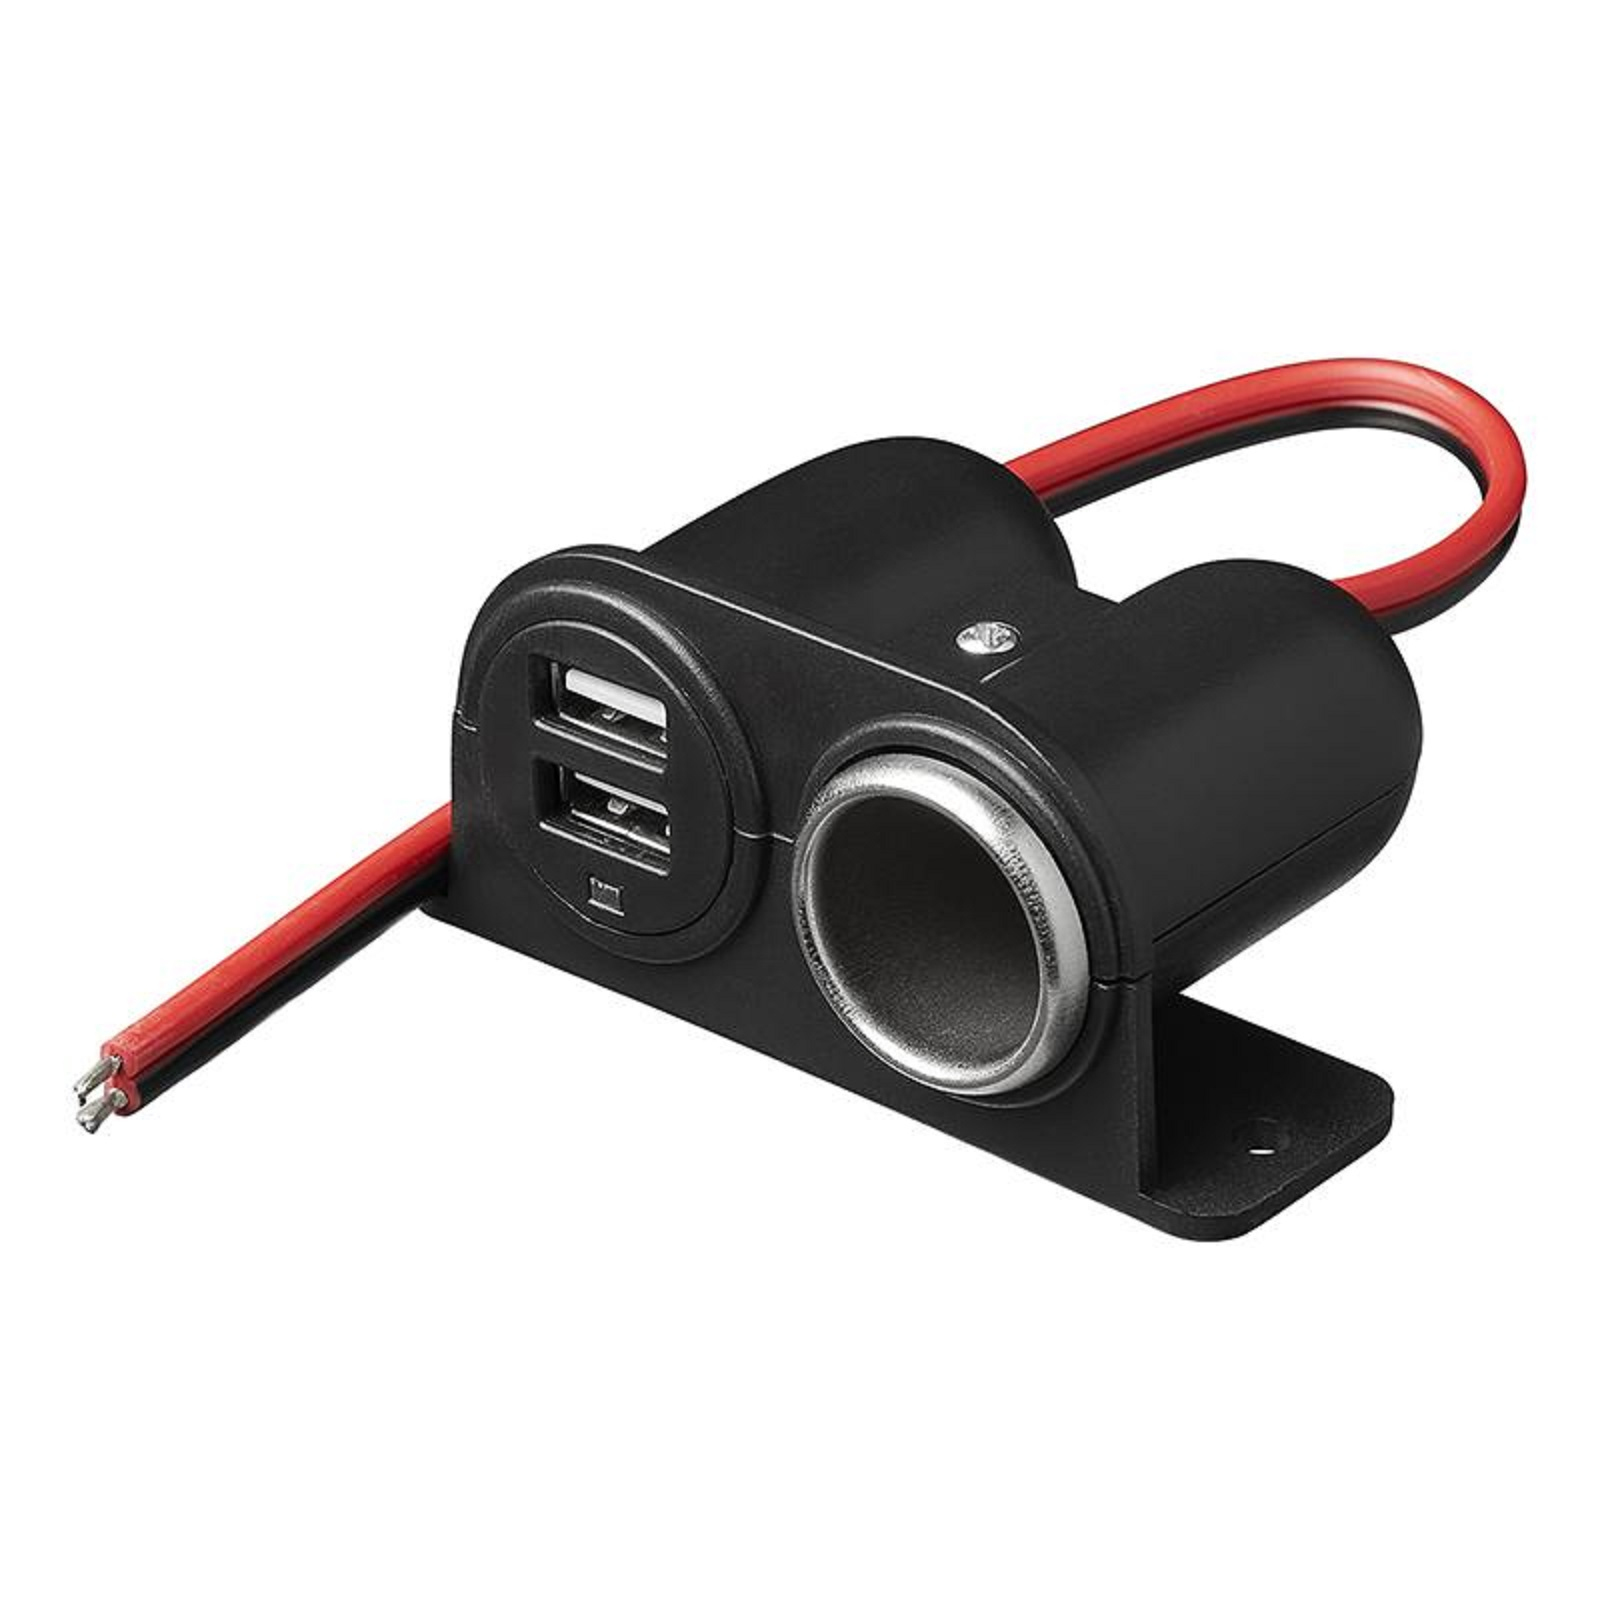 Pro Car Power-USB-Steckdose, flach, 12/24V bei Camping Wagner